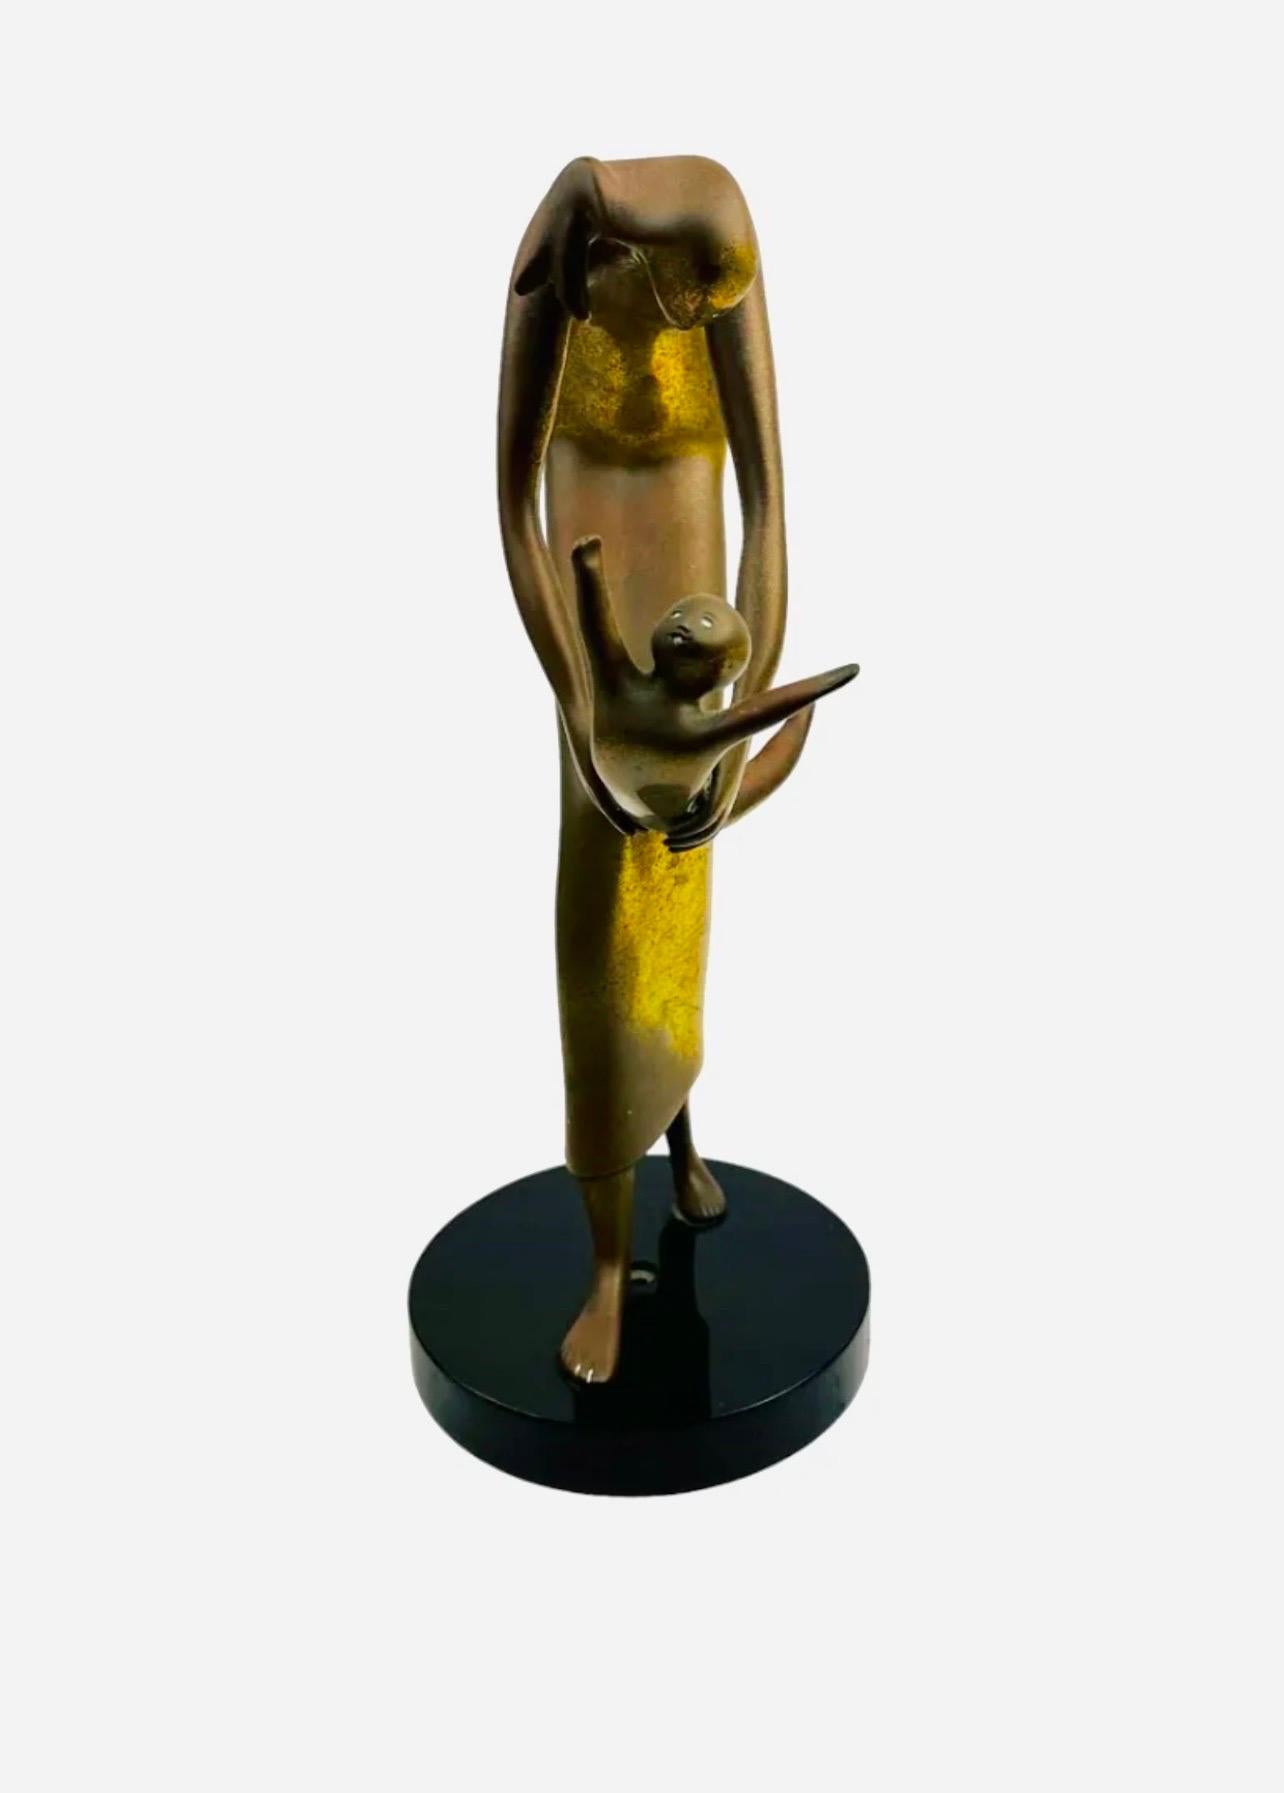 Esther Wertheimer ( Polish, Canadian 1926 - 2016 )
Hand signed  Wertheimer
Dimensions: 14.5 X 8 X 5.75 in.

This semi abstract figurative bronze sculpture depicts the tenderness and the loving bond shared between Parent and child, mother and infant